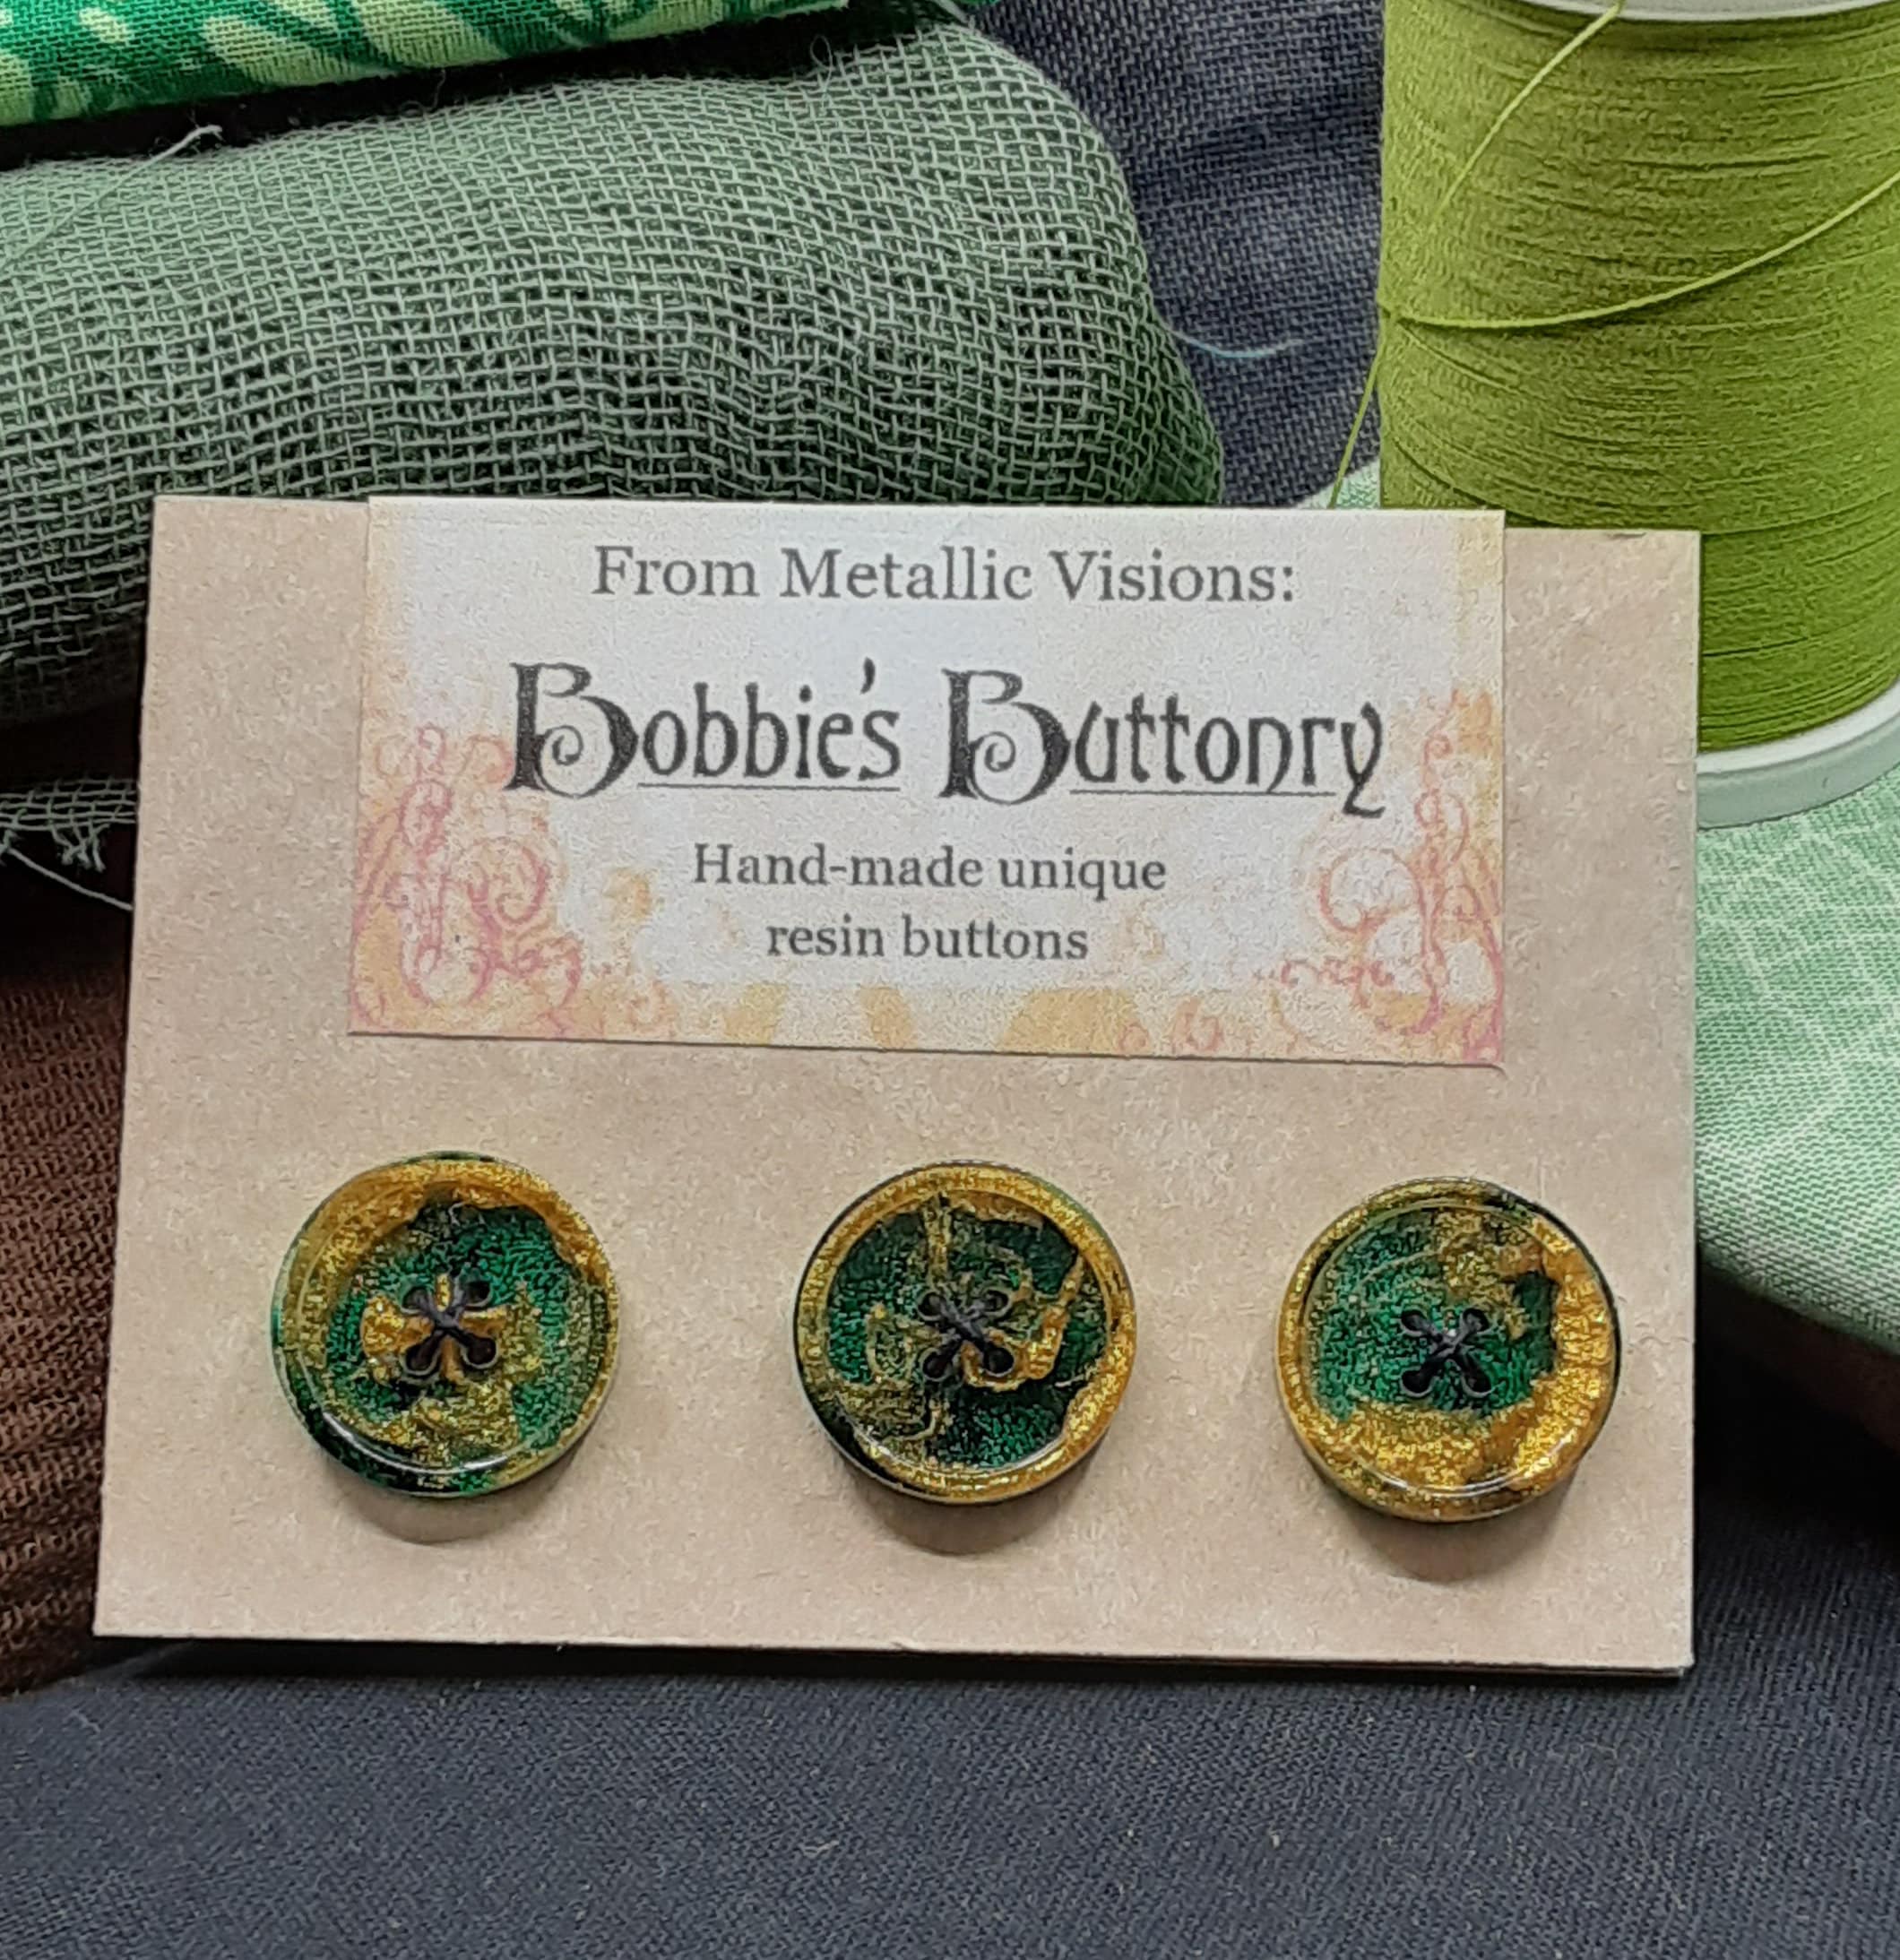 15mm Buttons Handmade Resin Gold Wire on Green 3 pack from Bobbie's Buttonry